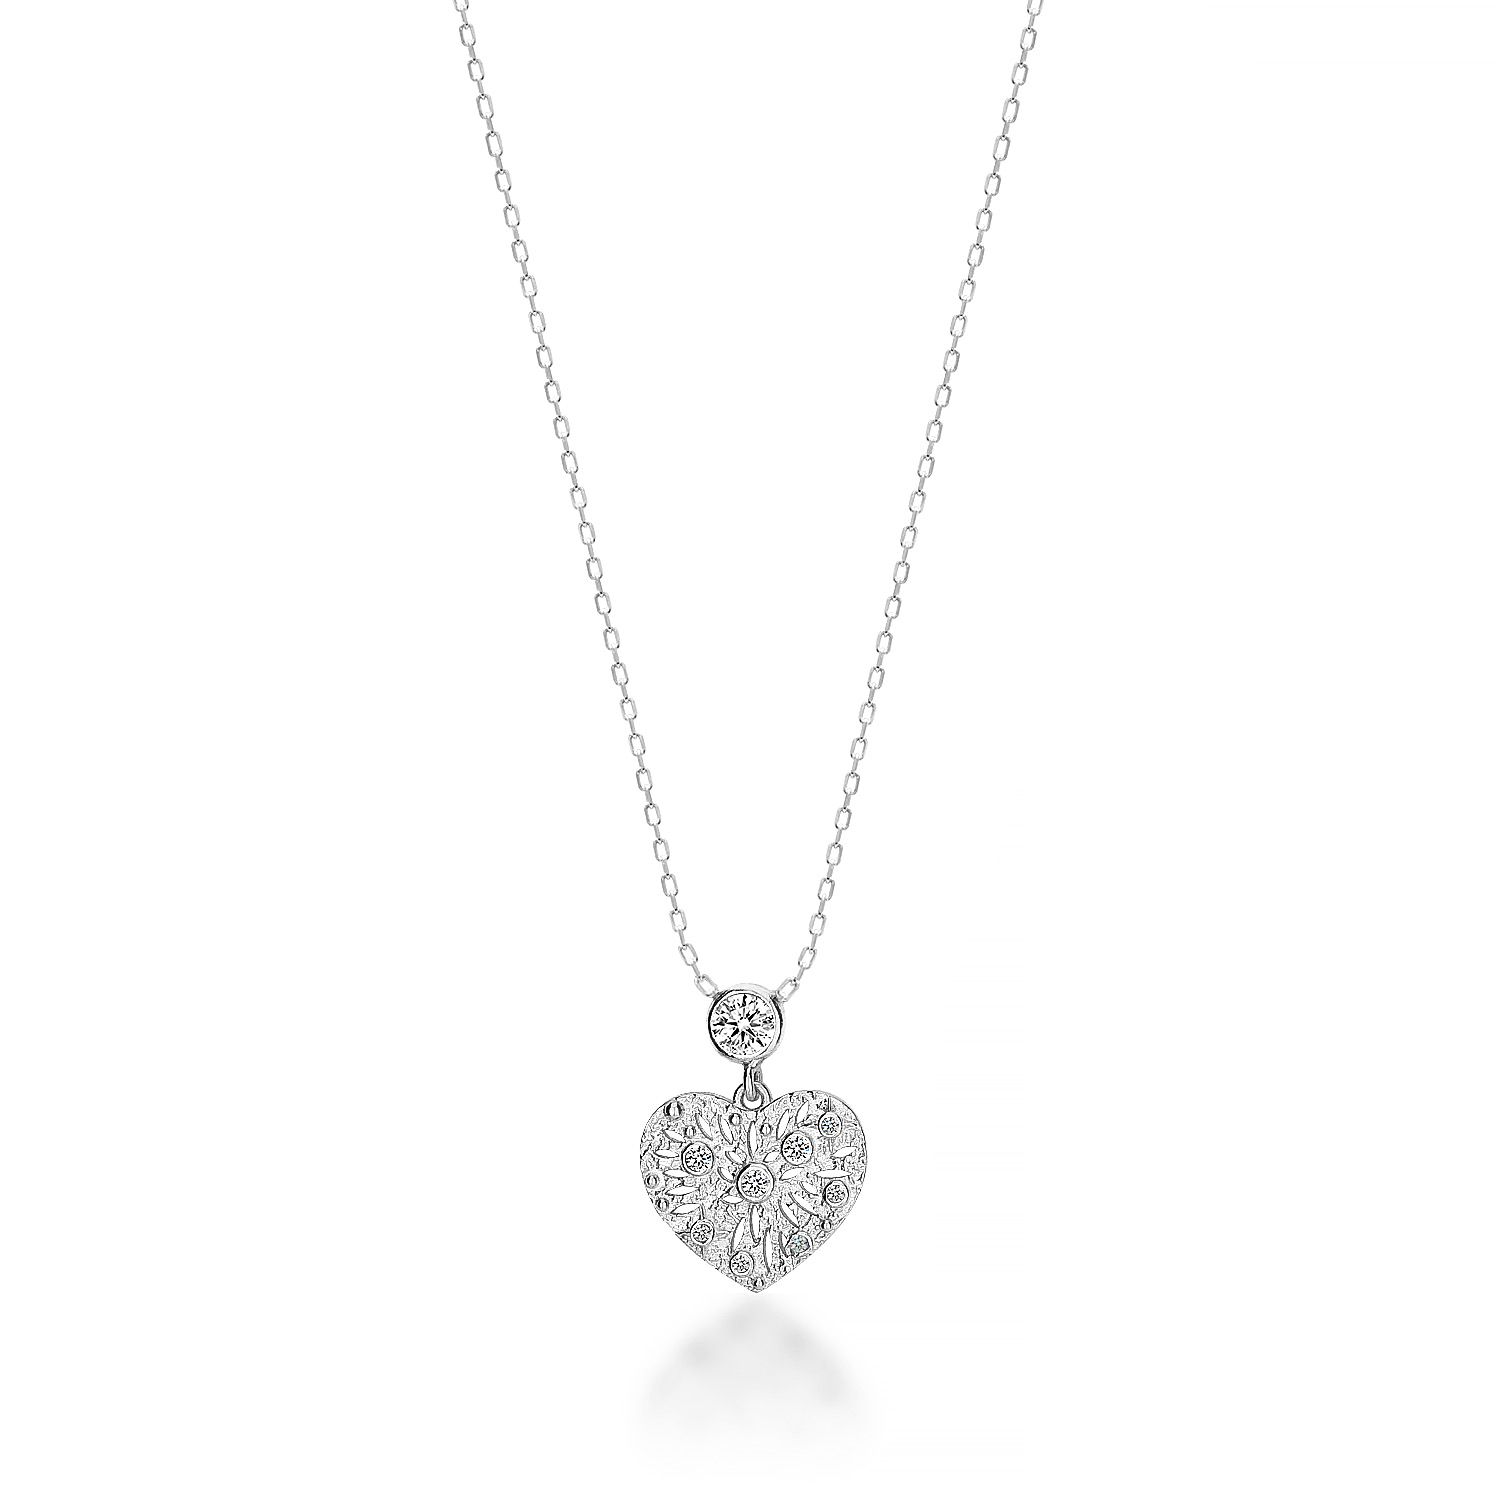 925-sterling-silver-heart-necklace-with-cubic-zirkon